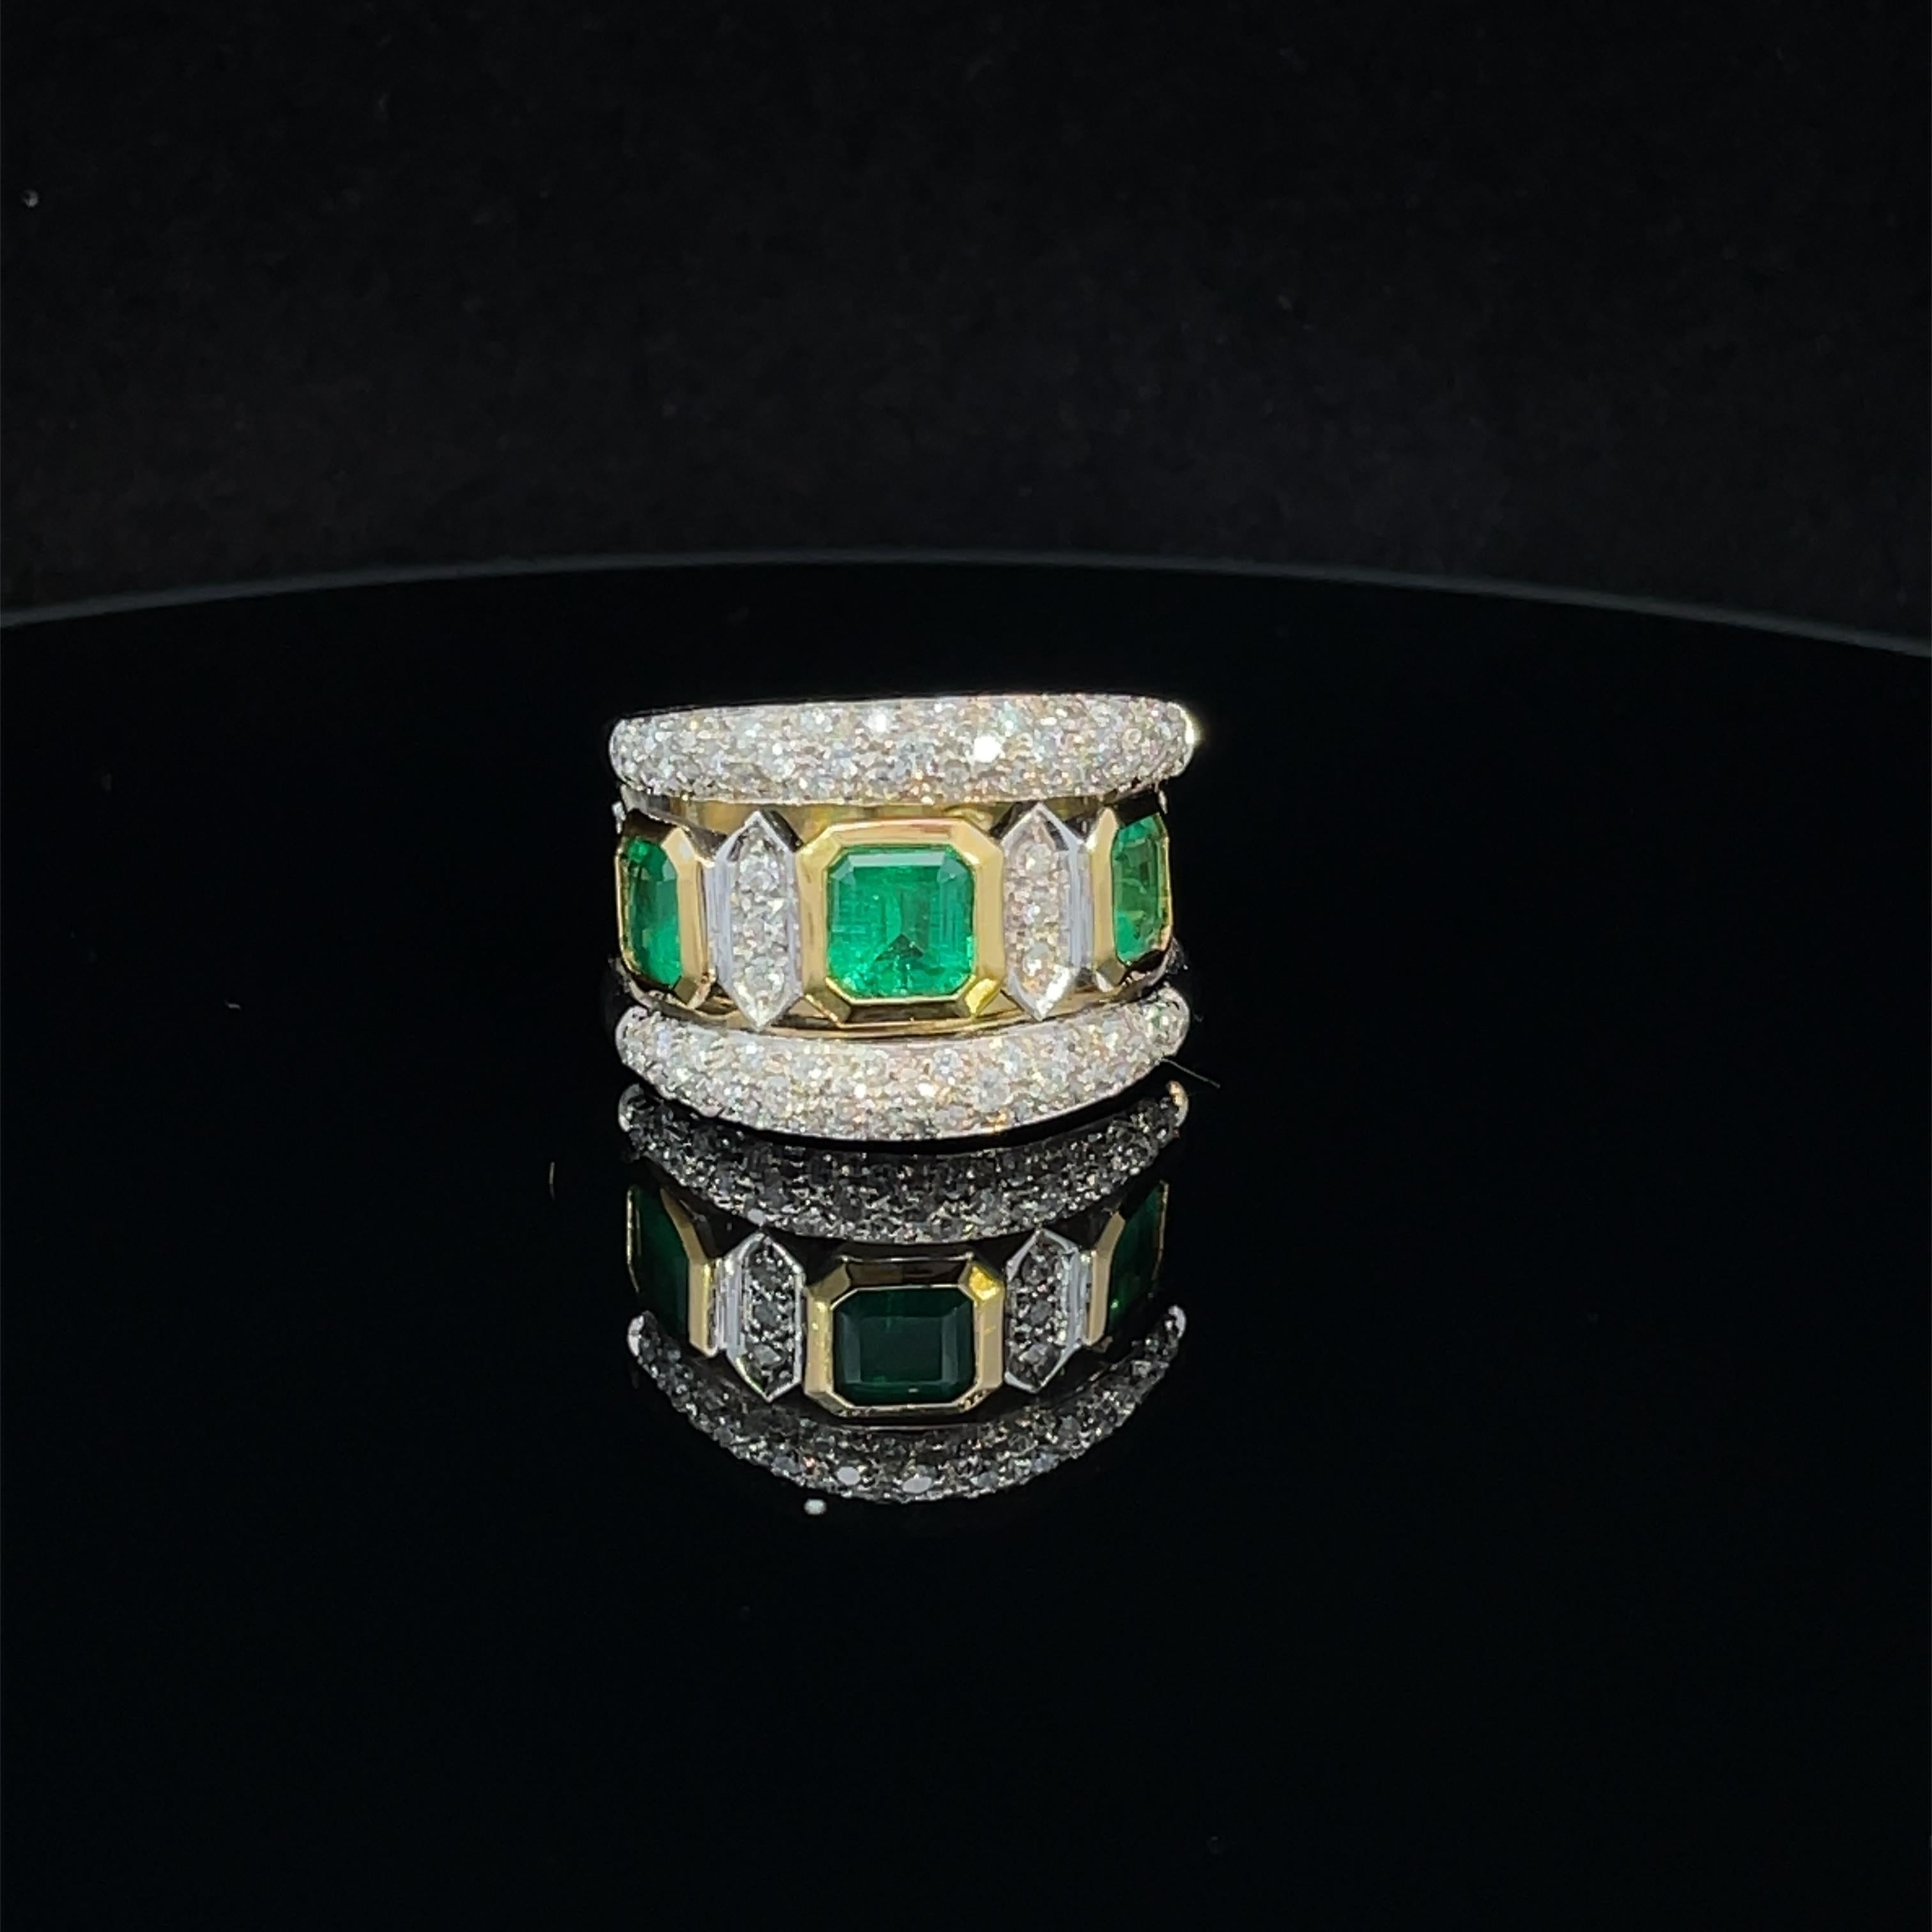 Two-tone 18k gold ring, emeralds and diamonds
a band crossed in the center by three emeralds of beautiful bright green color (Colombia)  rectangular-cut with octagonal outline totaling ct 2.00, brilliant-cut diamond outline totaling ct 1.20